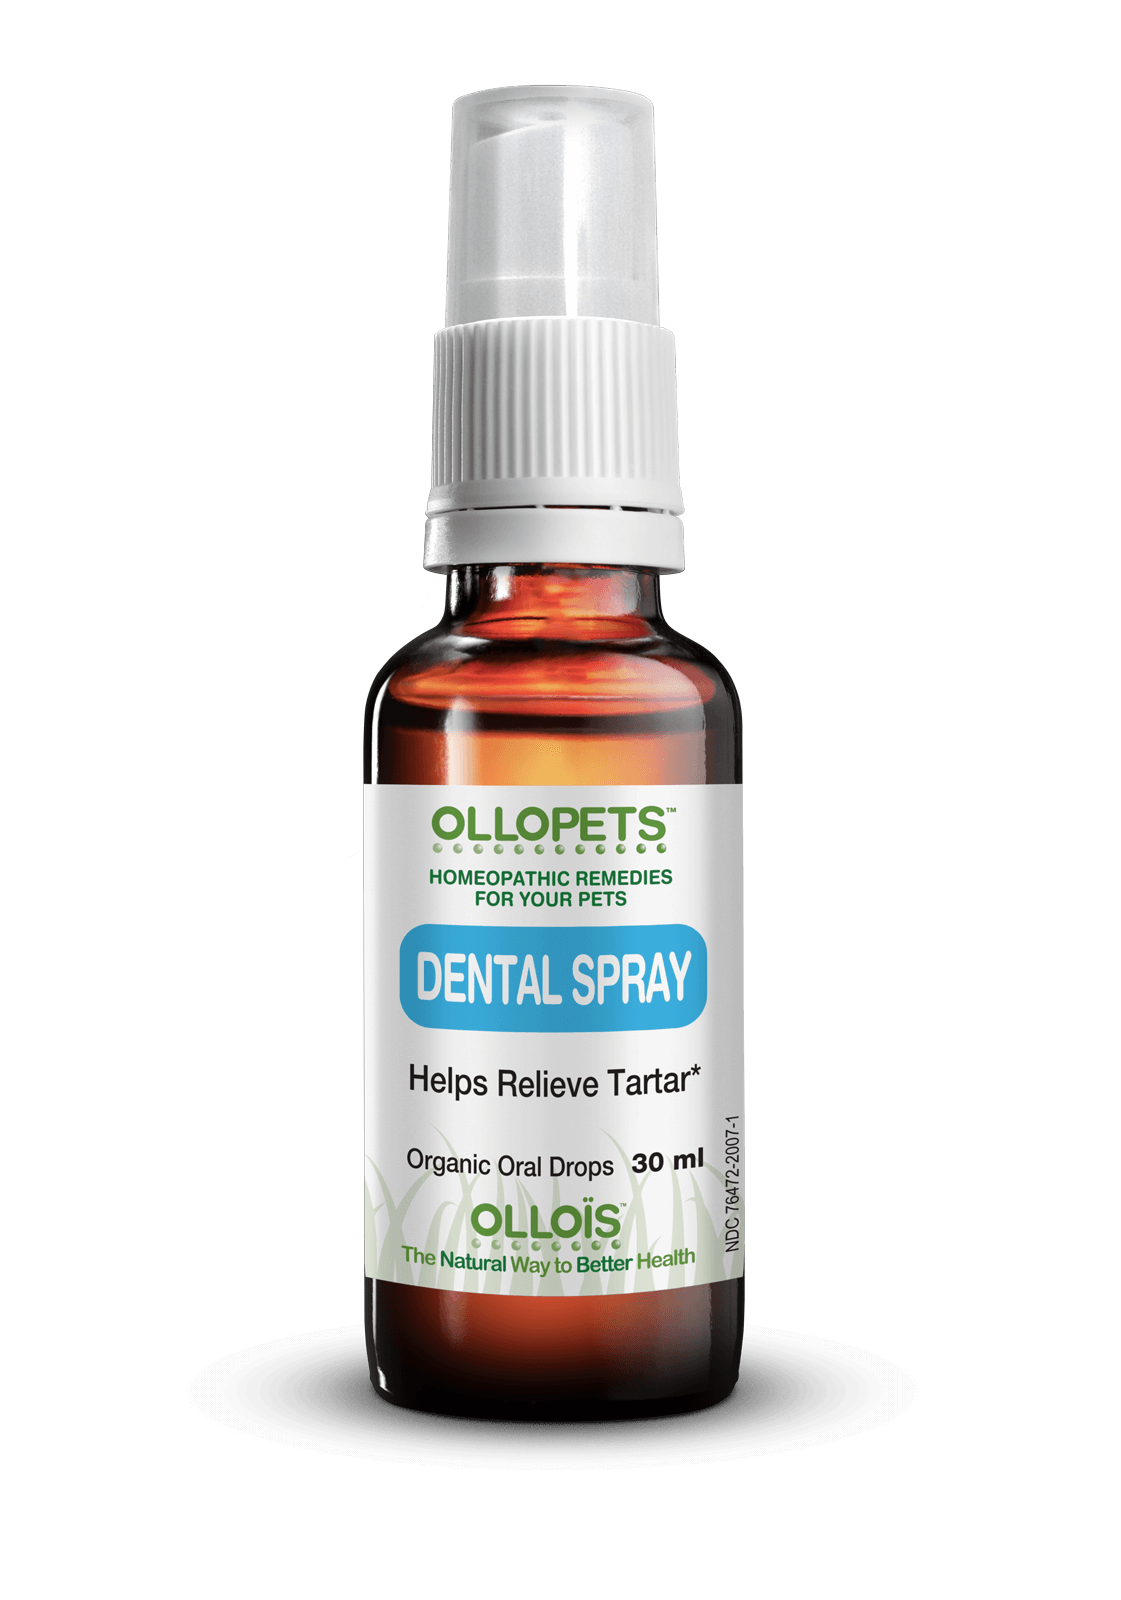 Ollopets Dental Spray - Homeopathic Spray for Pets